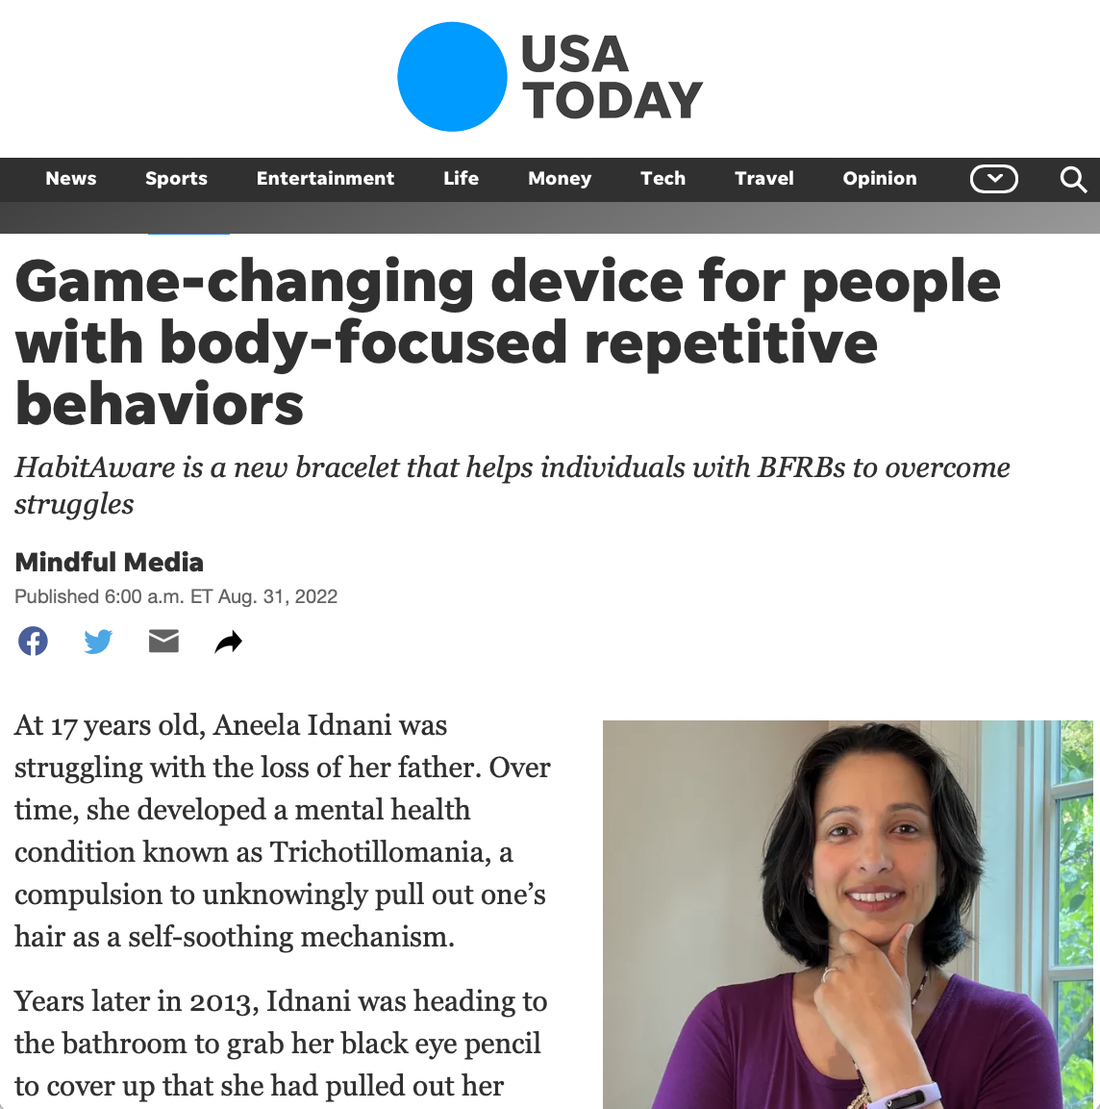 Game-changing device for people with body-focused repetitive behaviors